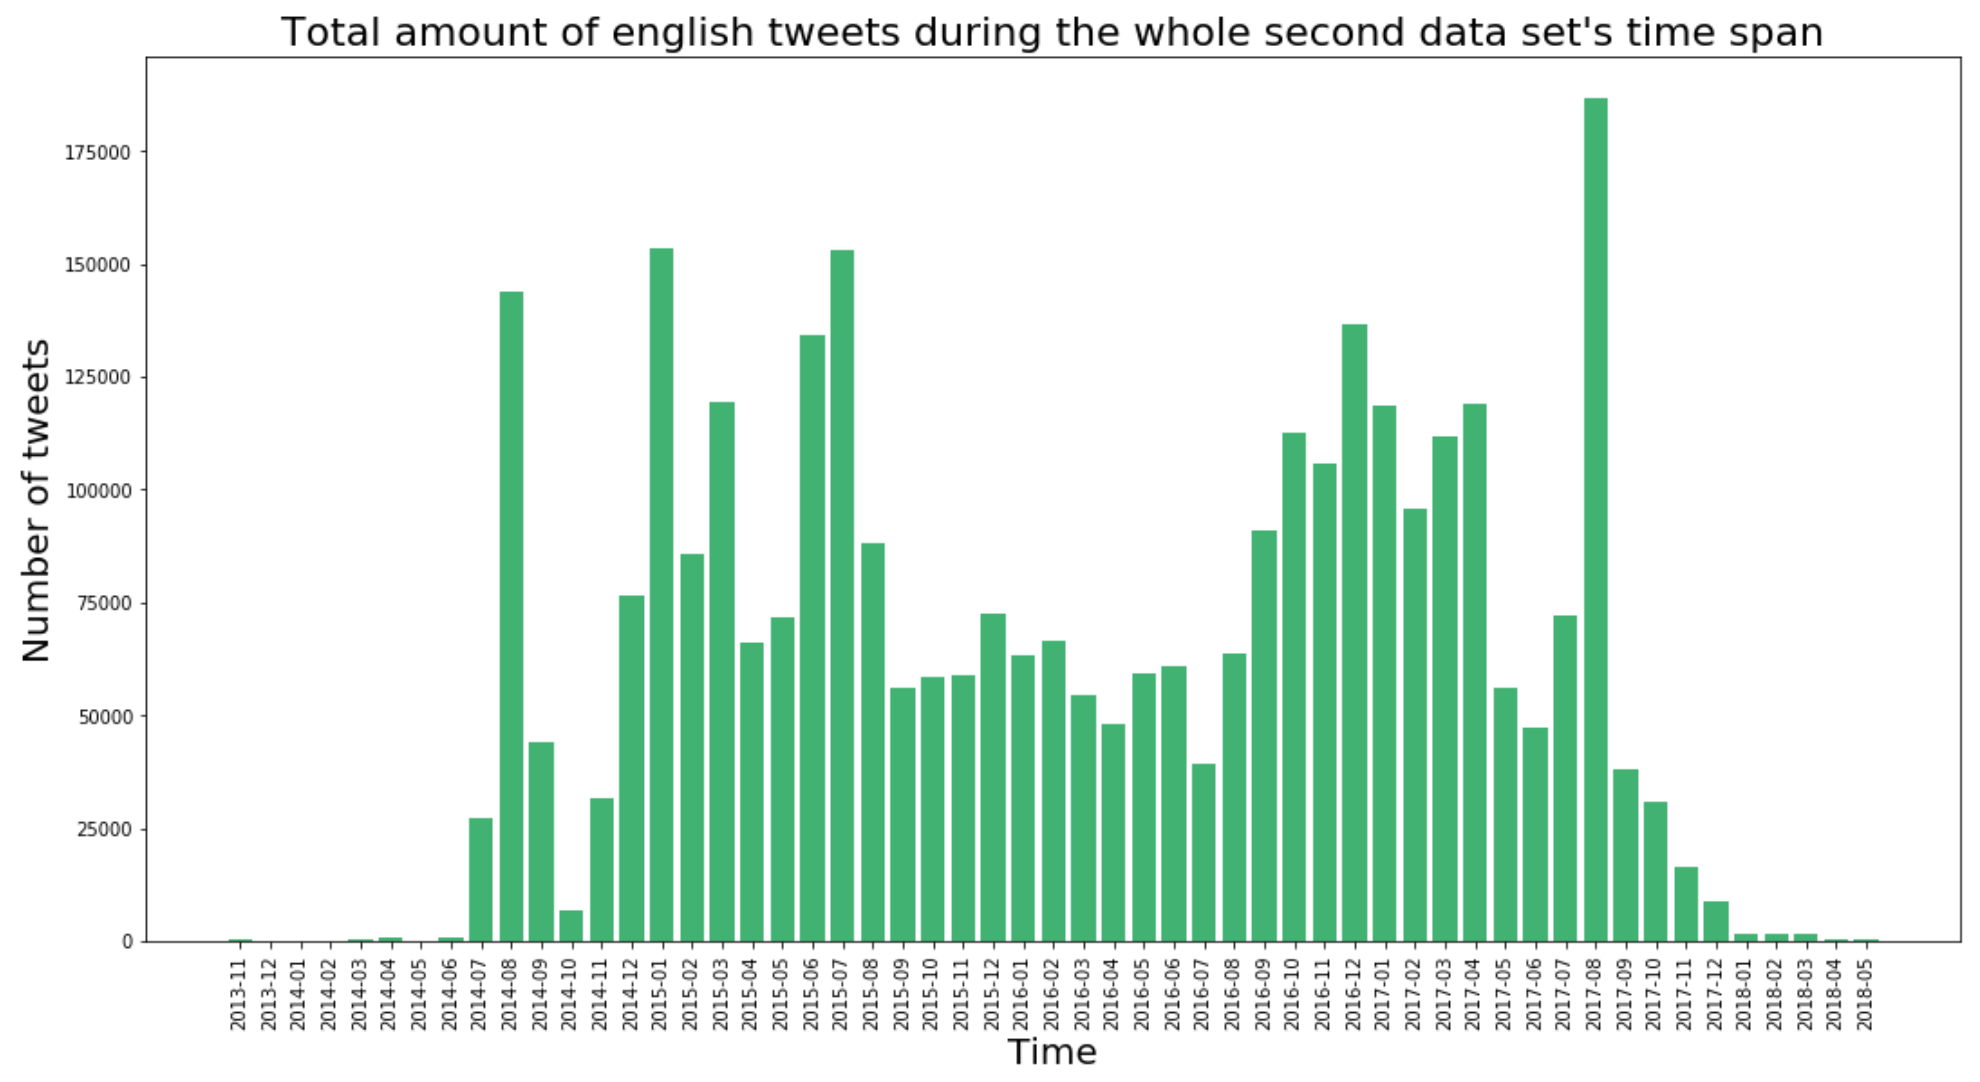 Total english tweets in the second dataset